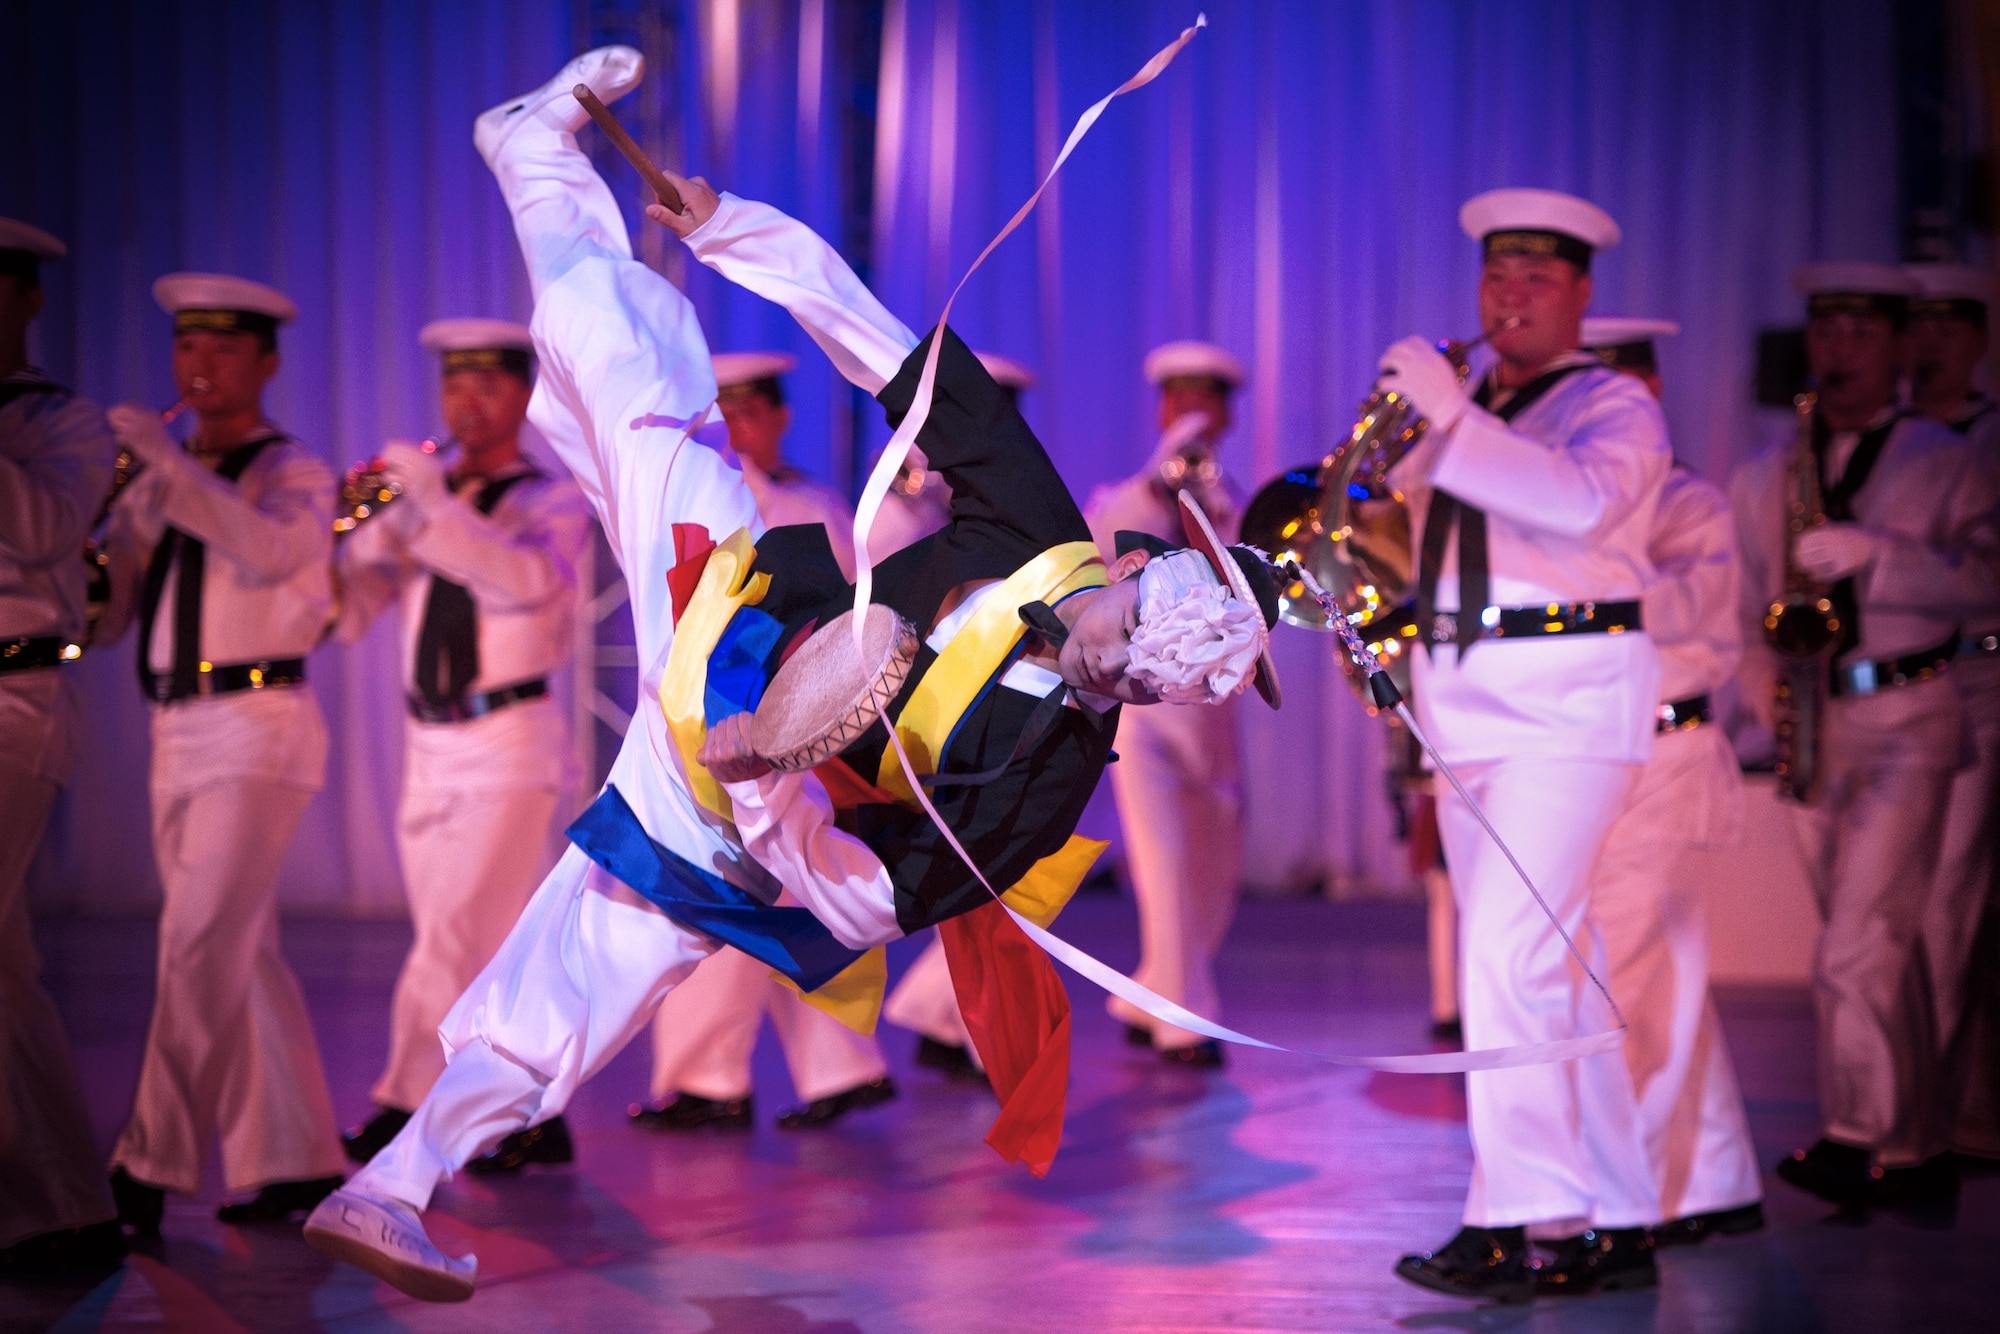 A South Korean navy band performer dances during the Japan Self-Defense Force Marching Festival at the Nippon Budokan Arena in Tokyo, Nov. 13, 2015. The festival allowed all of the bands the opportunity to engage and interact with one another. (U.S. Air Force photo/Airman 1st Class Delano Scott)